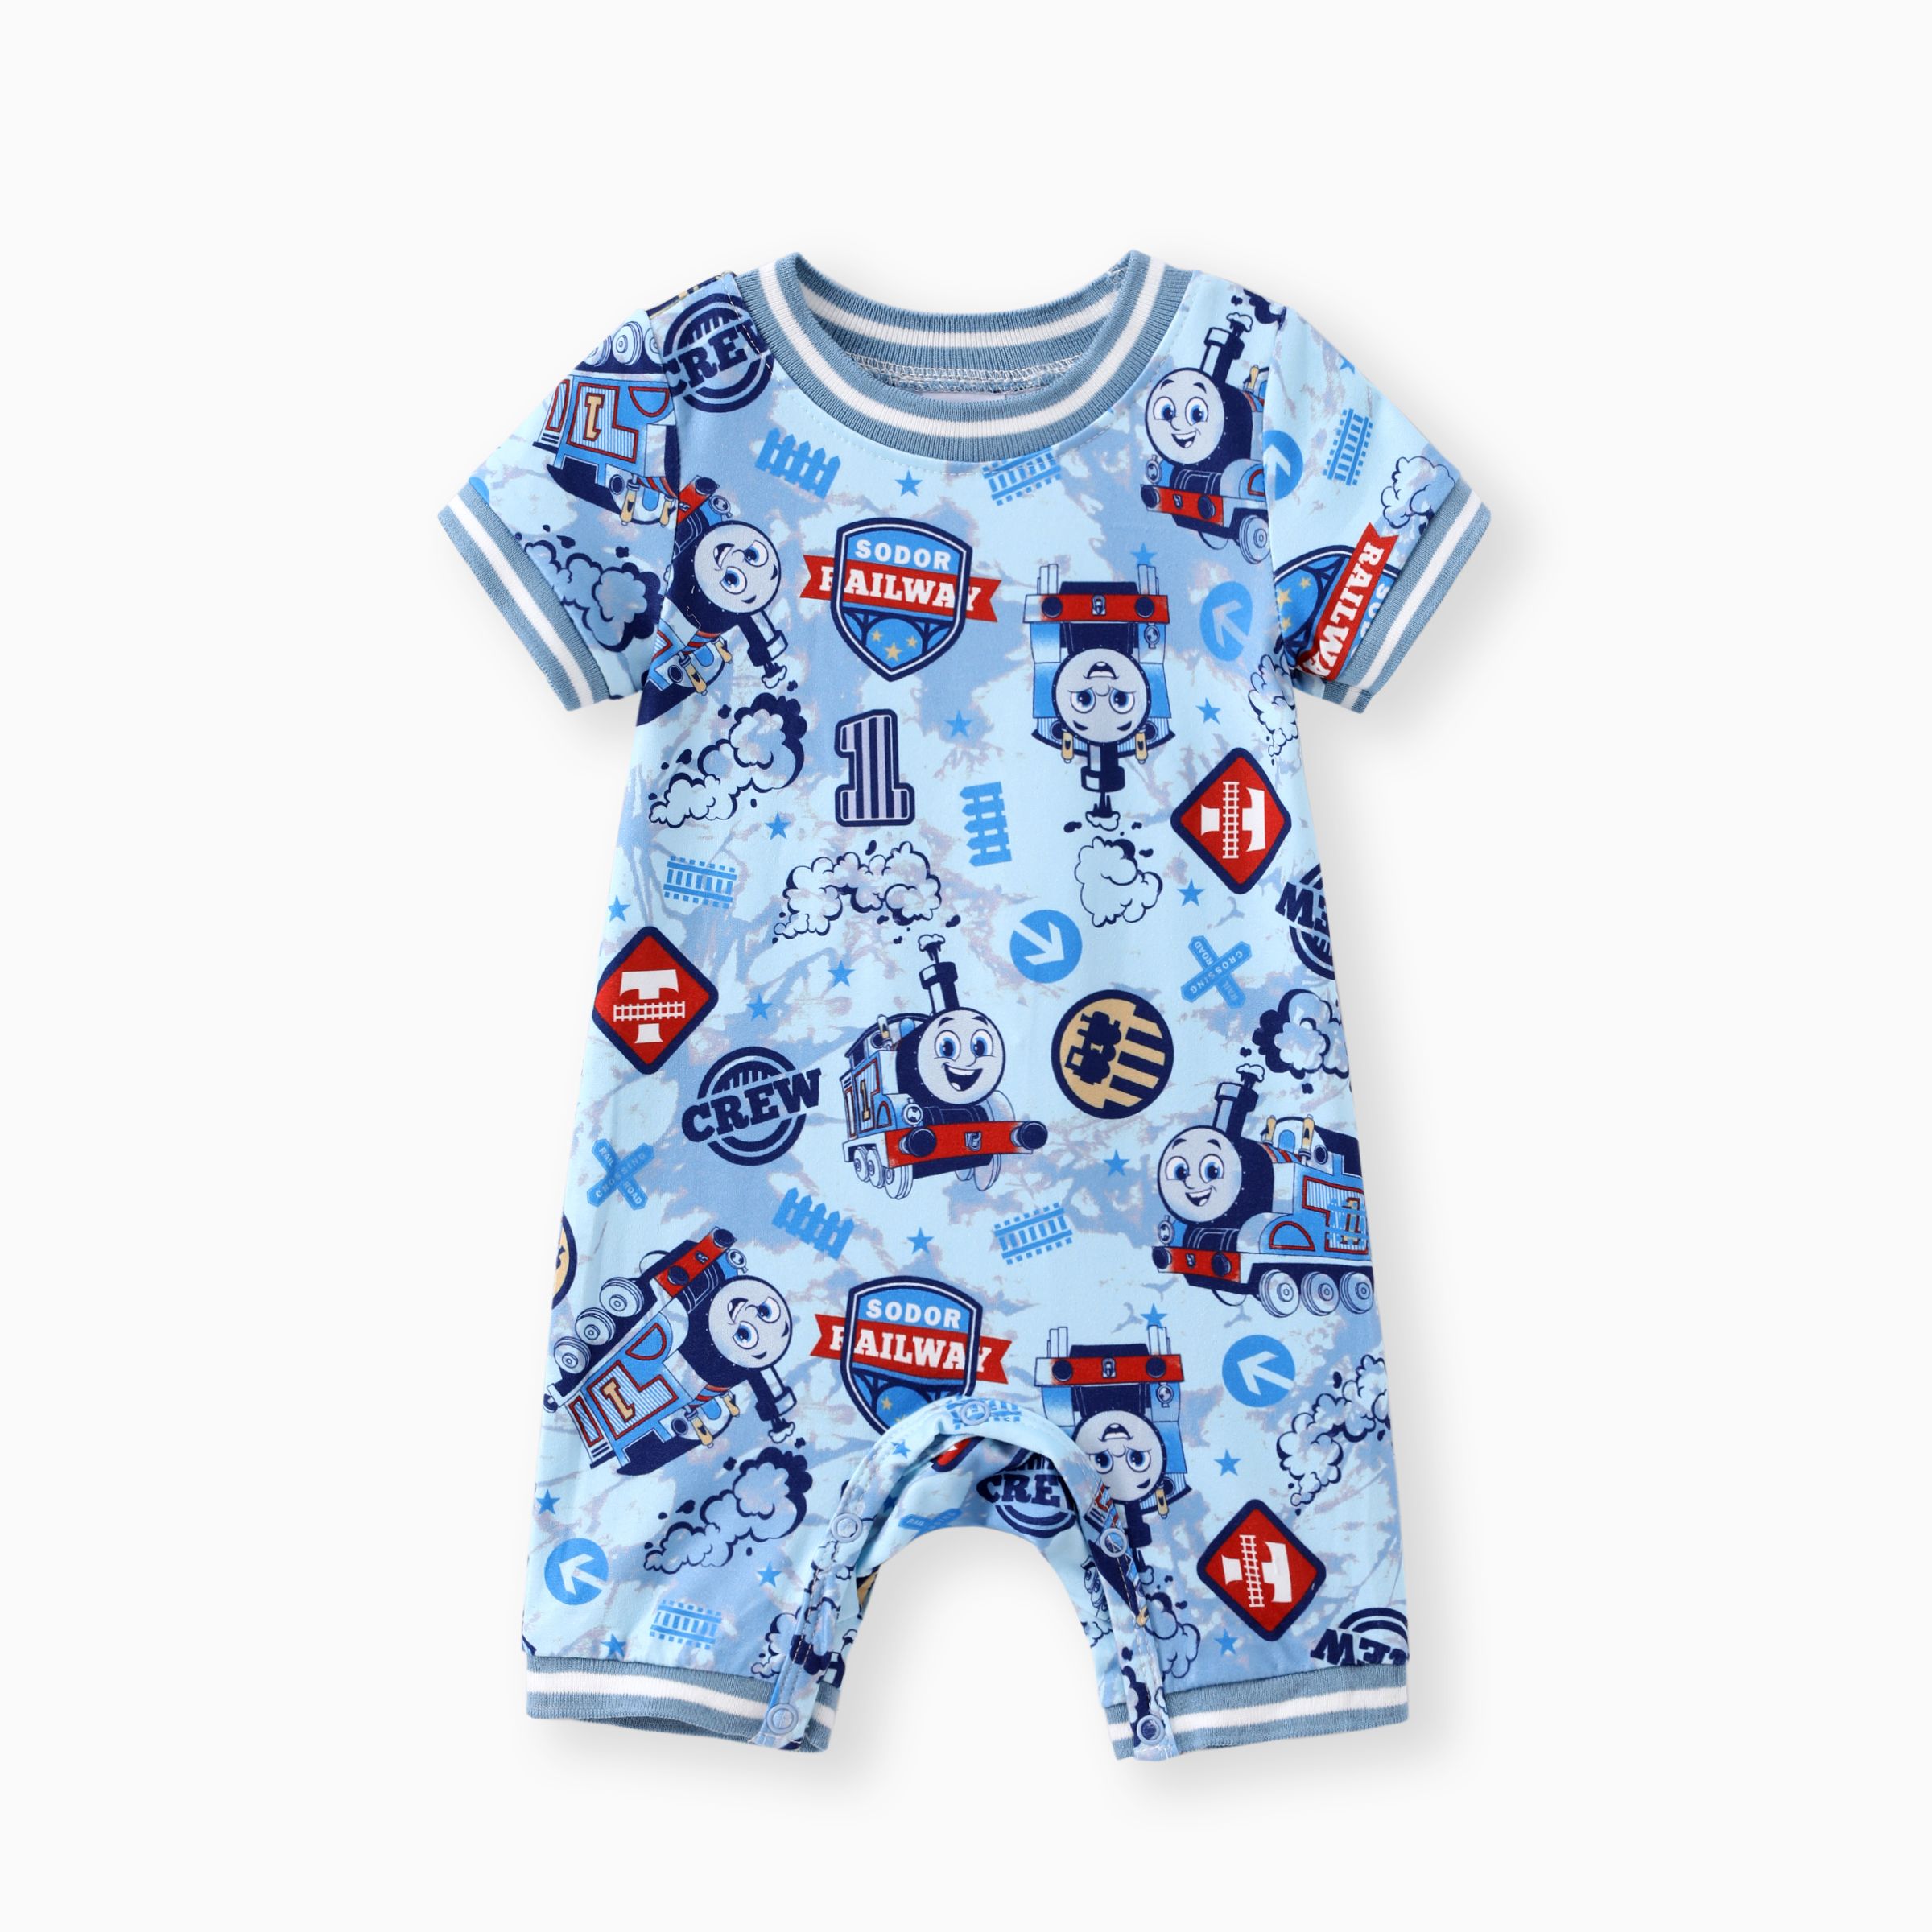 

Thomas and Friends Baby Boys 1pc Character Checkboard/Tie-dyed Print Short-sleeve Onesie